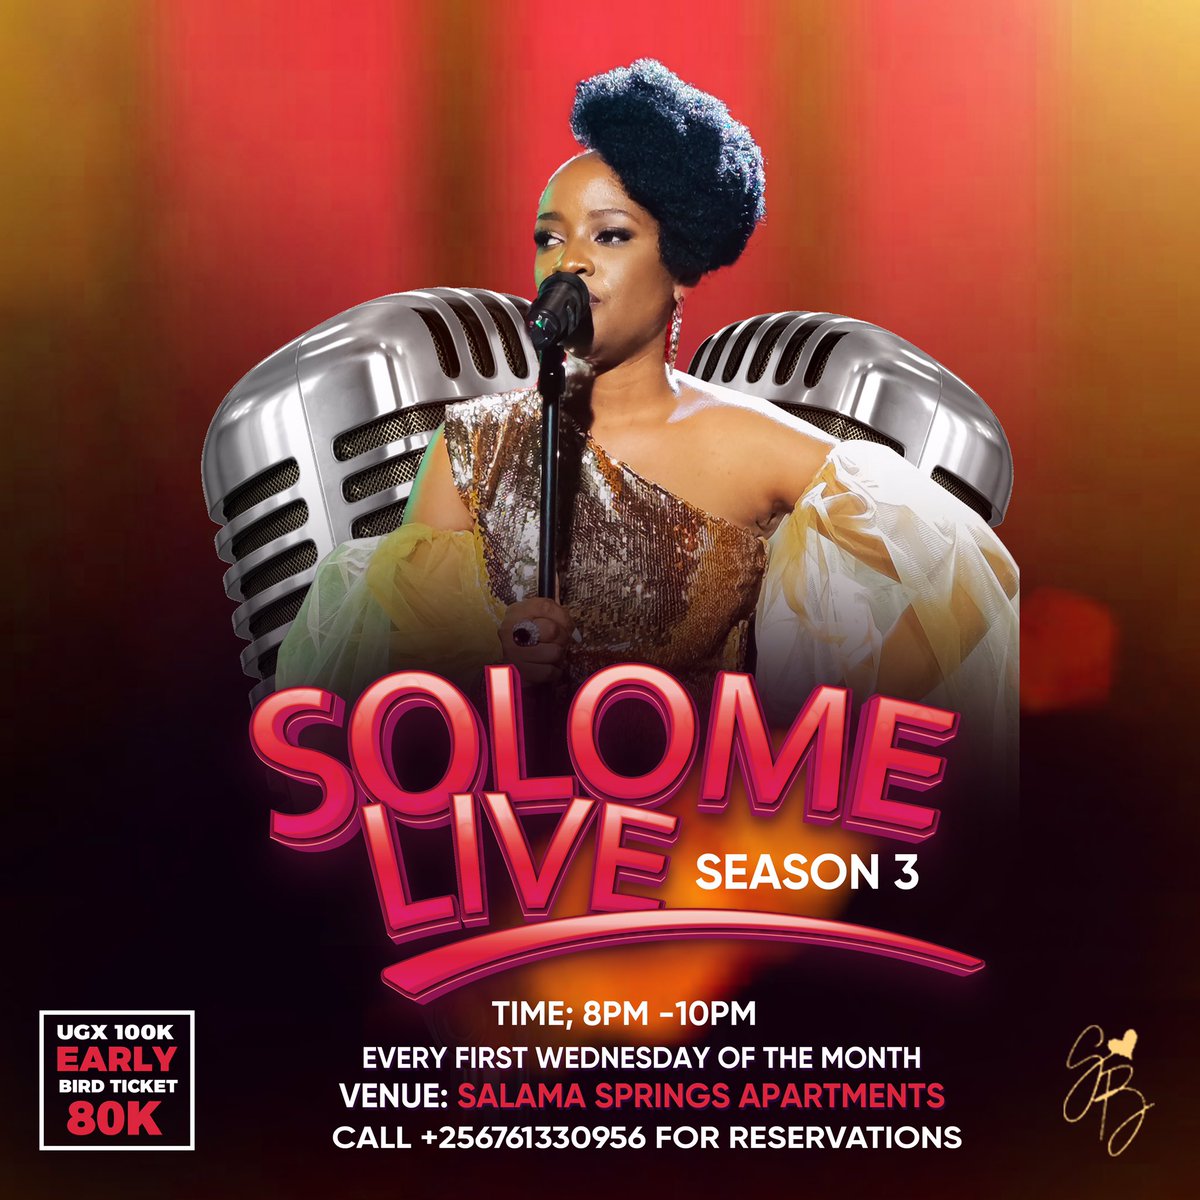 The Queen of love @solomebasuuta is back ✨✨✨✨

 #SolomeLive season 3 is here...🎤🔥🎵 *May 1st, 2024* will be the first of many shows, every first Wednesday of the month at Salama Spring Apartments in Bugolobi* starting at 8pm!

Ticket link ▶️ qkt.io/SolomeLiveMay*